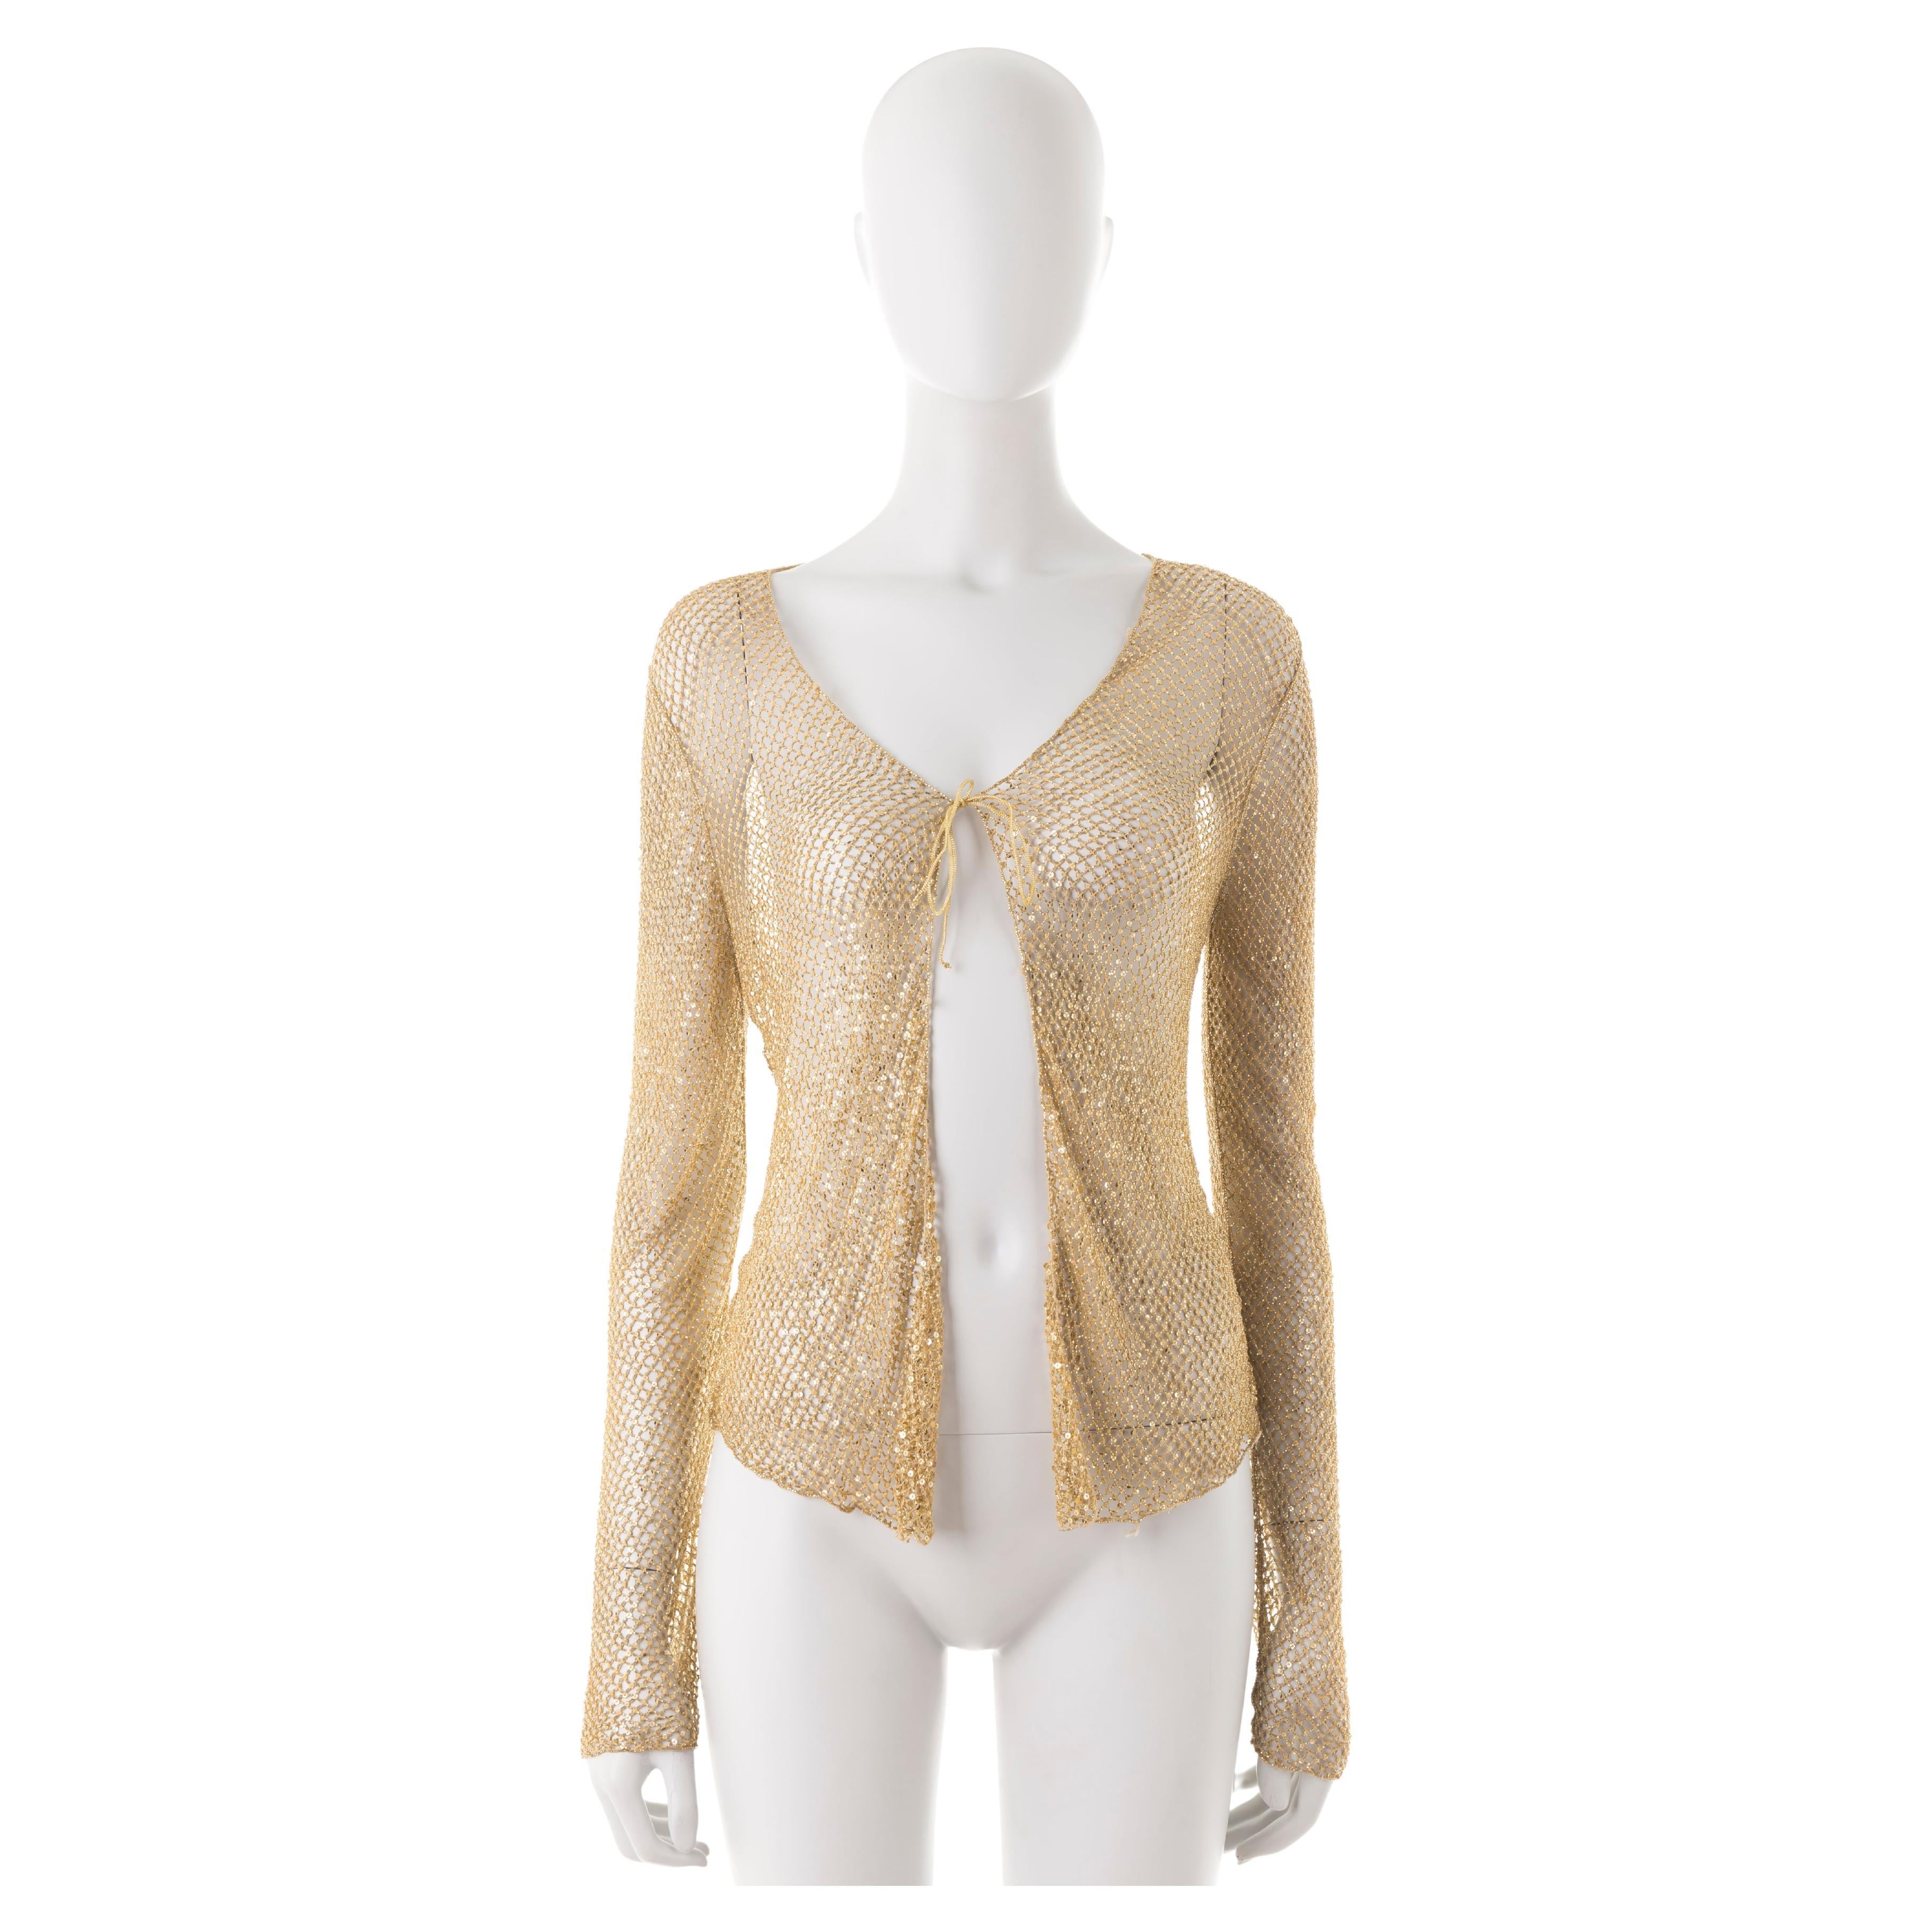 - Fishnet cardigan
- Front tie
- Gold beads
- Size L